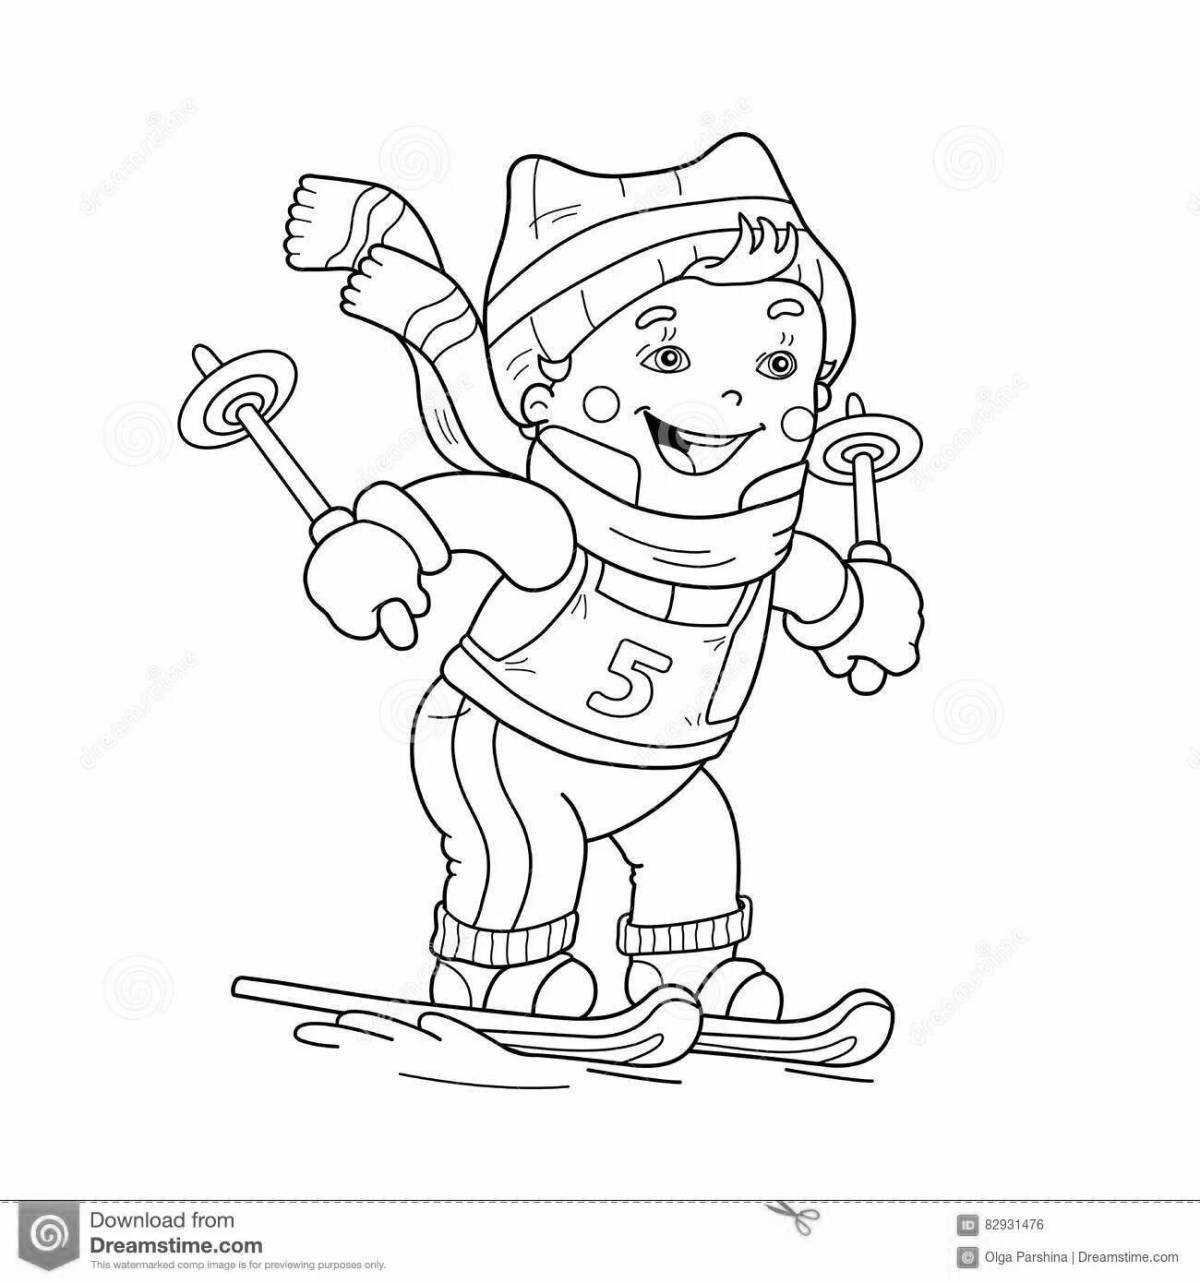 Colorific winter sports coloring book for children 6-7 years old